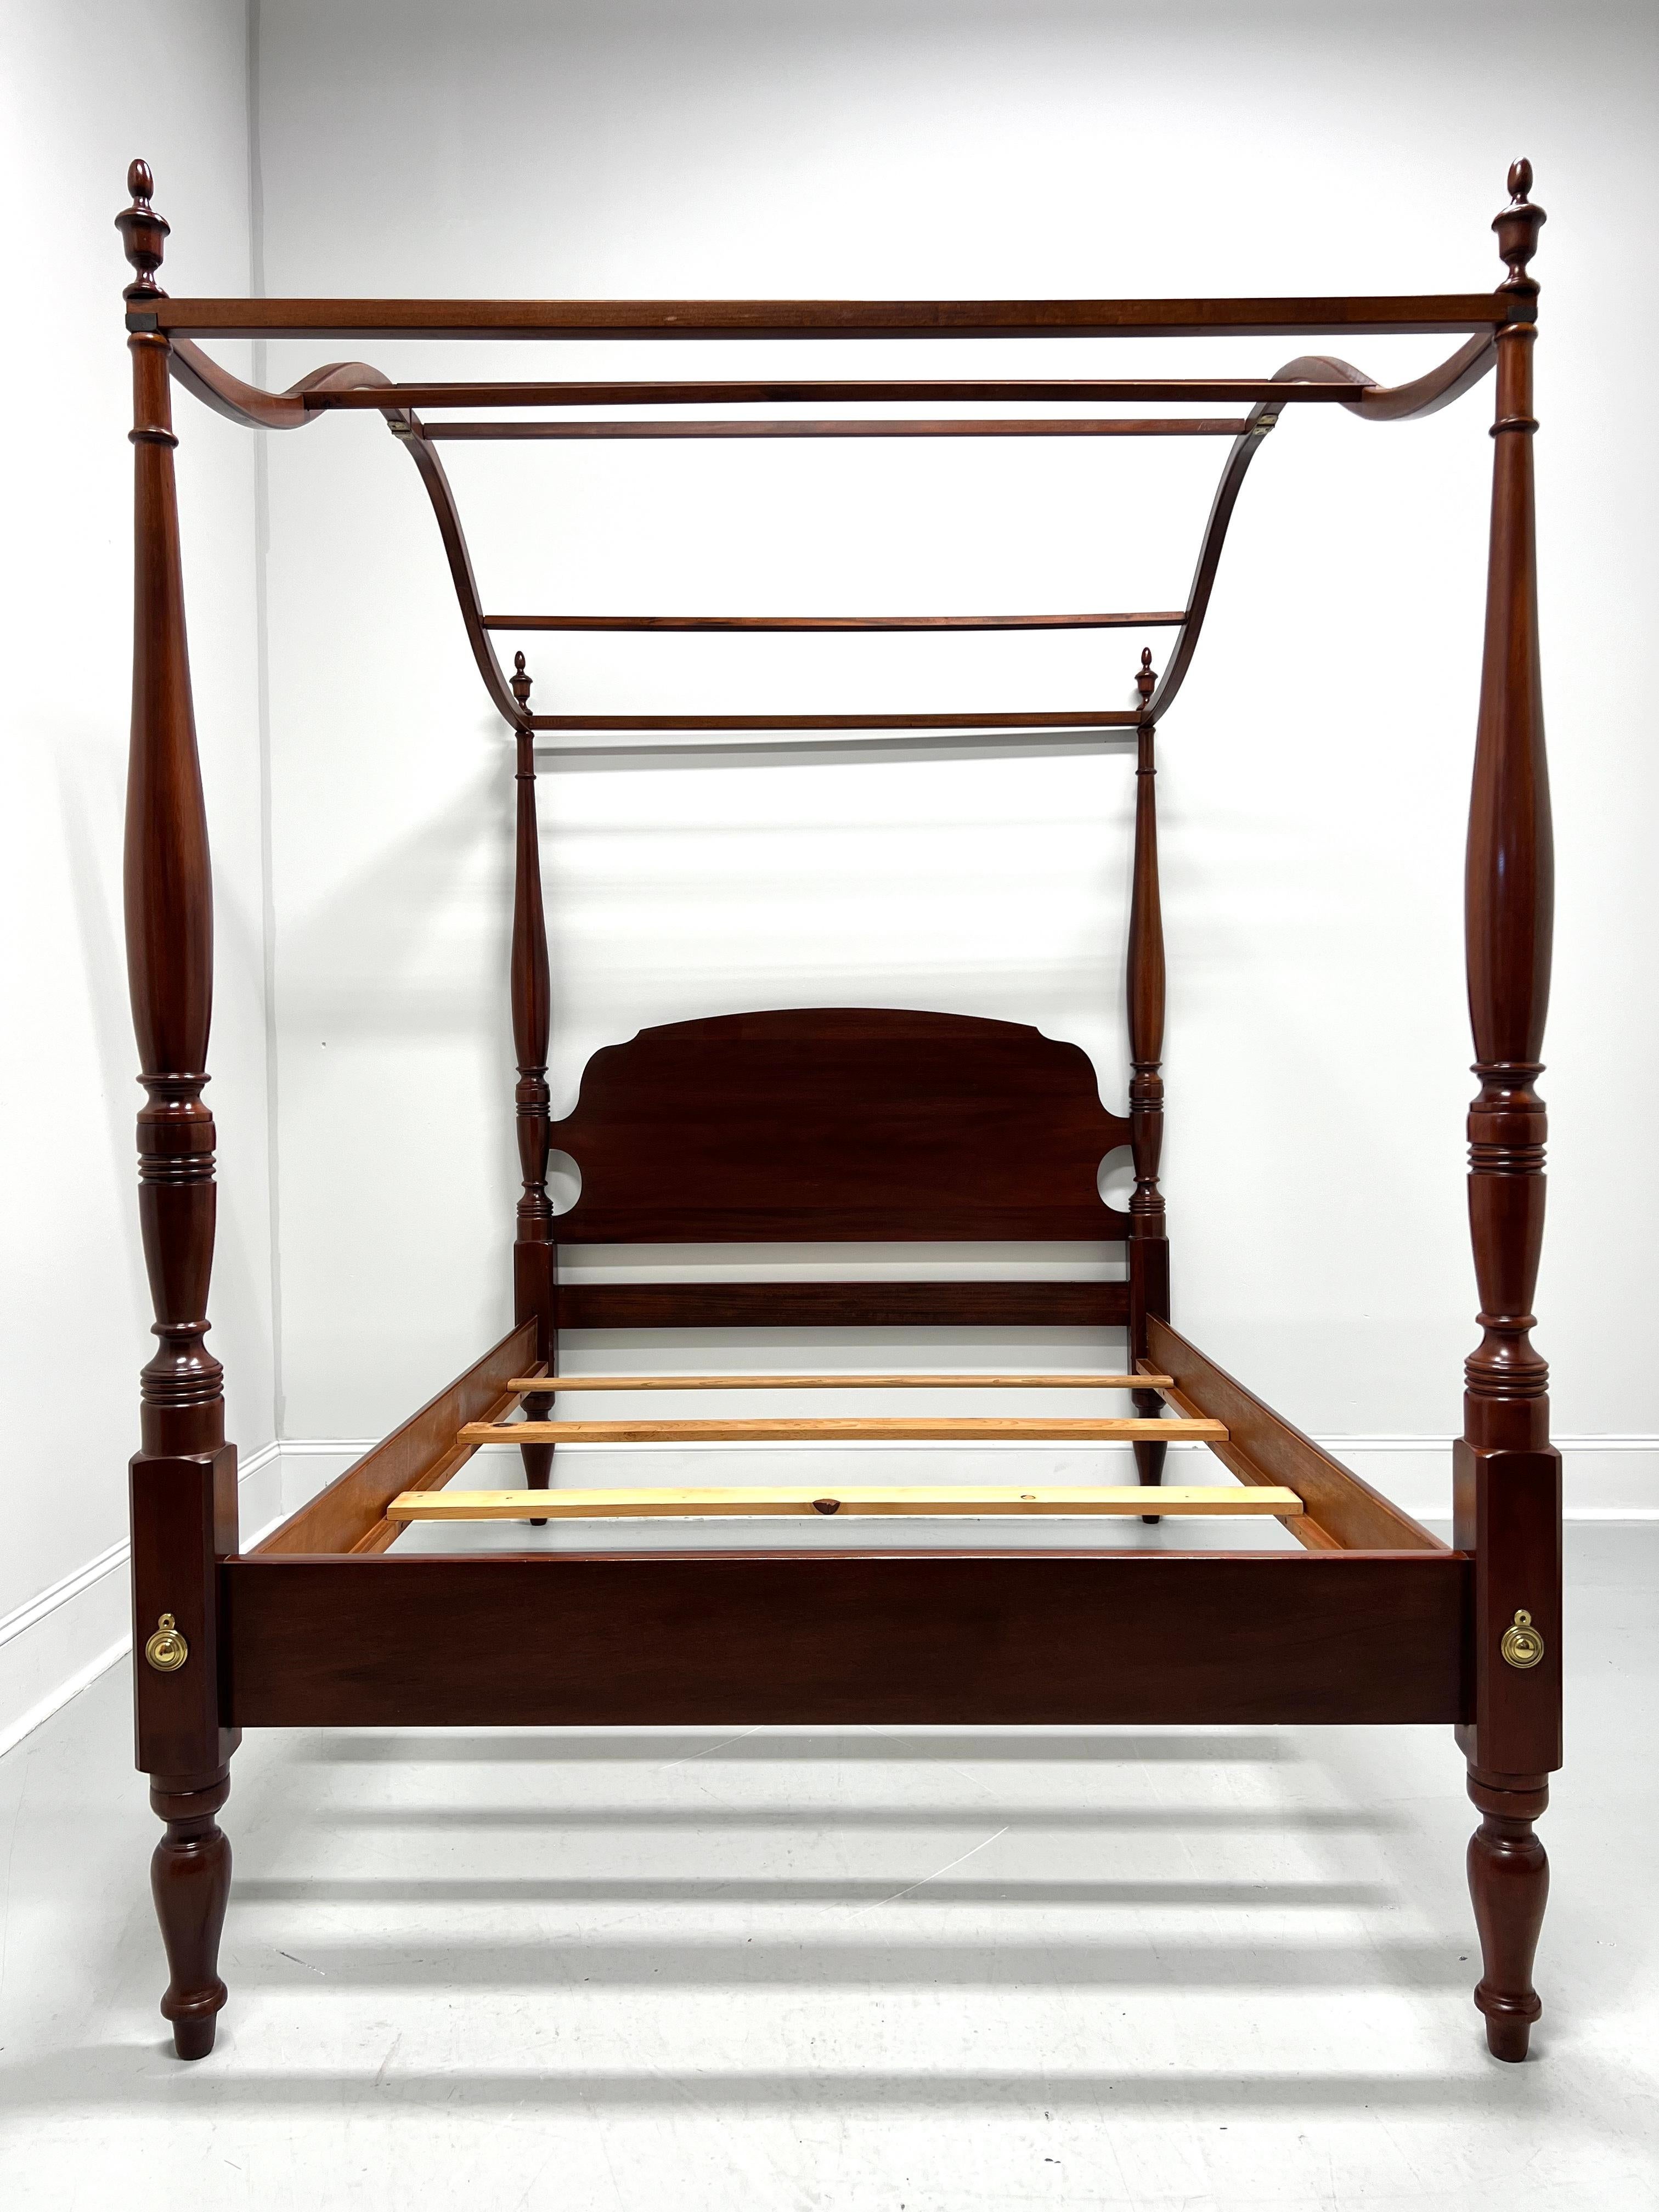 A Chippendale style full size poster bed with canopy by Link-Taylor, from their Heirloom Gallery. Solid mahogany with carved arch headboard, four turned posts capped by finials, an open arched wood slat canopy, brass hardware, metal clip held side